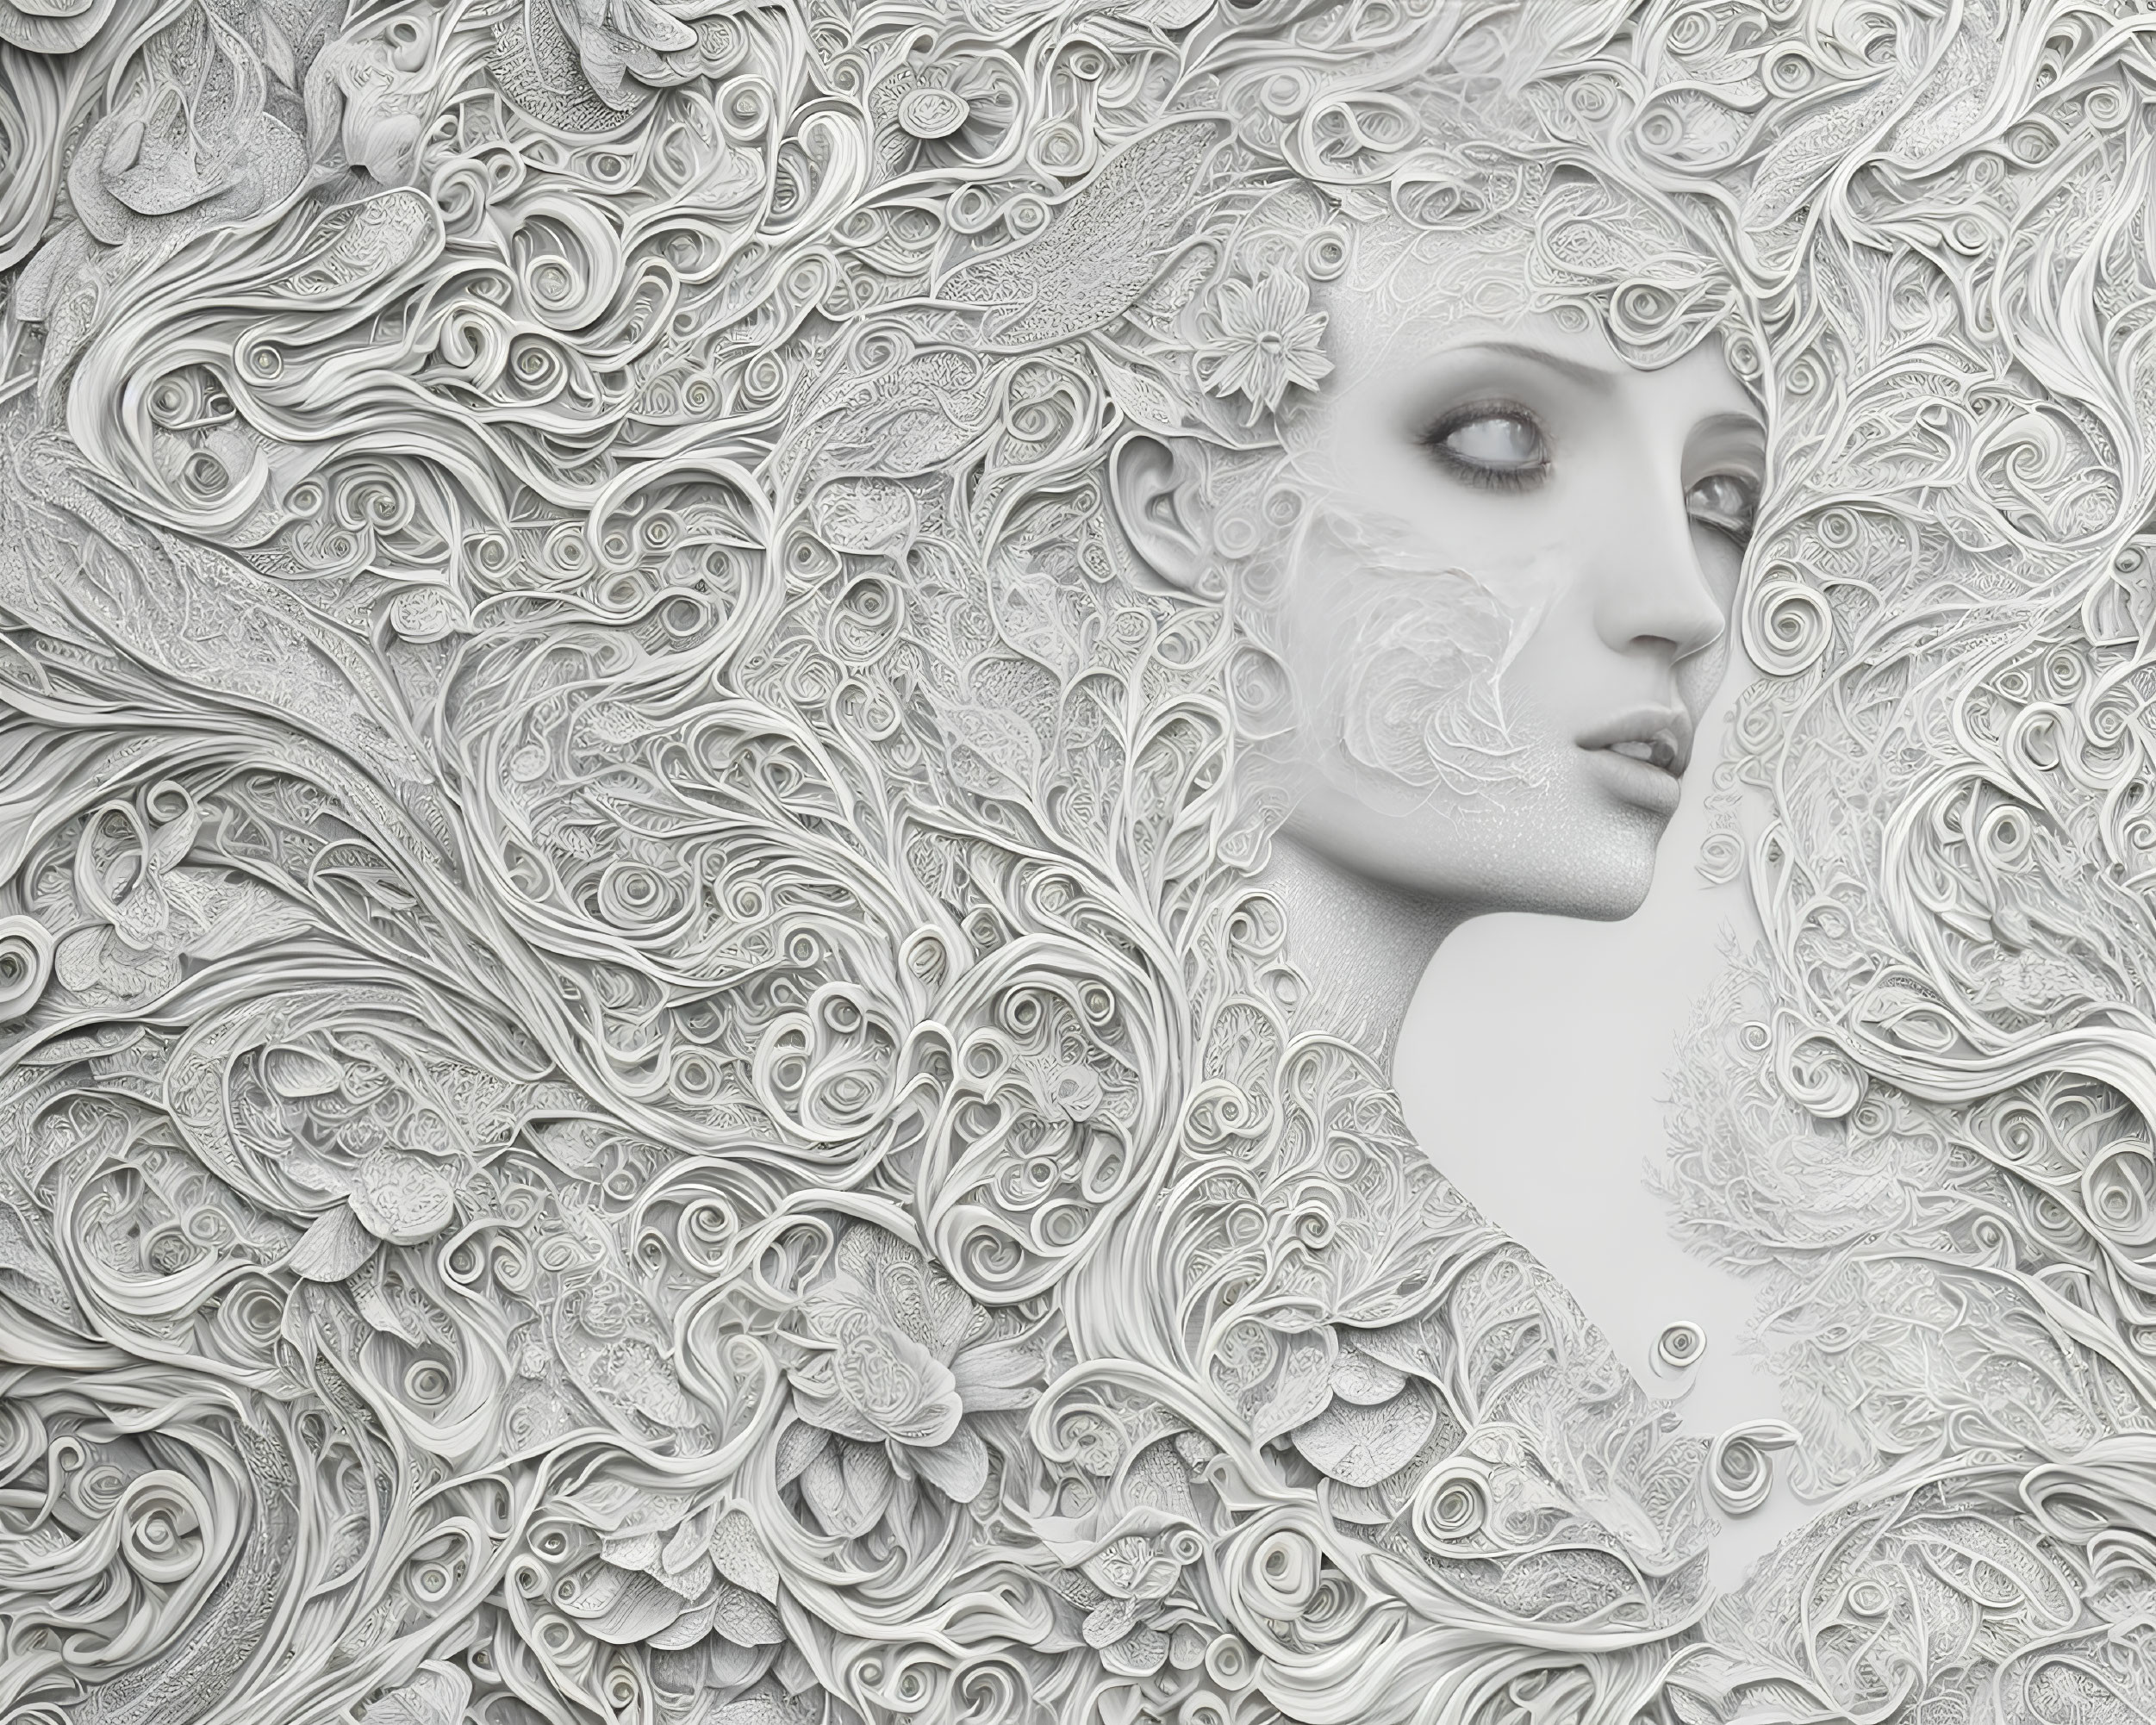 Intricate Bas-Relief of Woman's Face in Floral Patterns